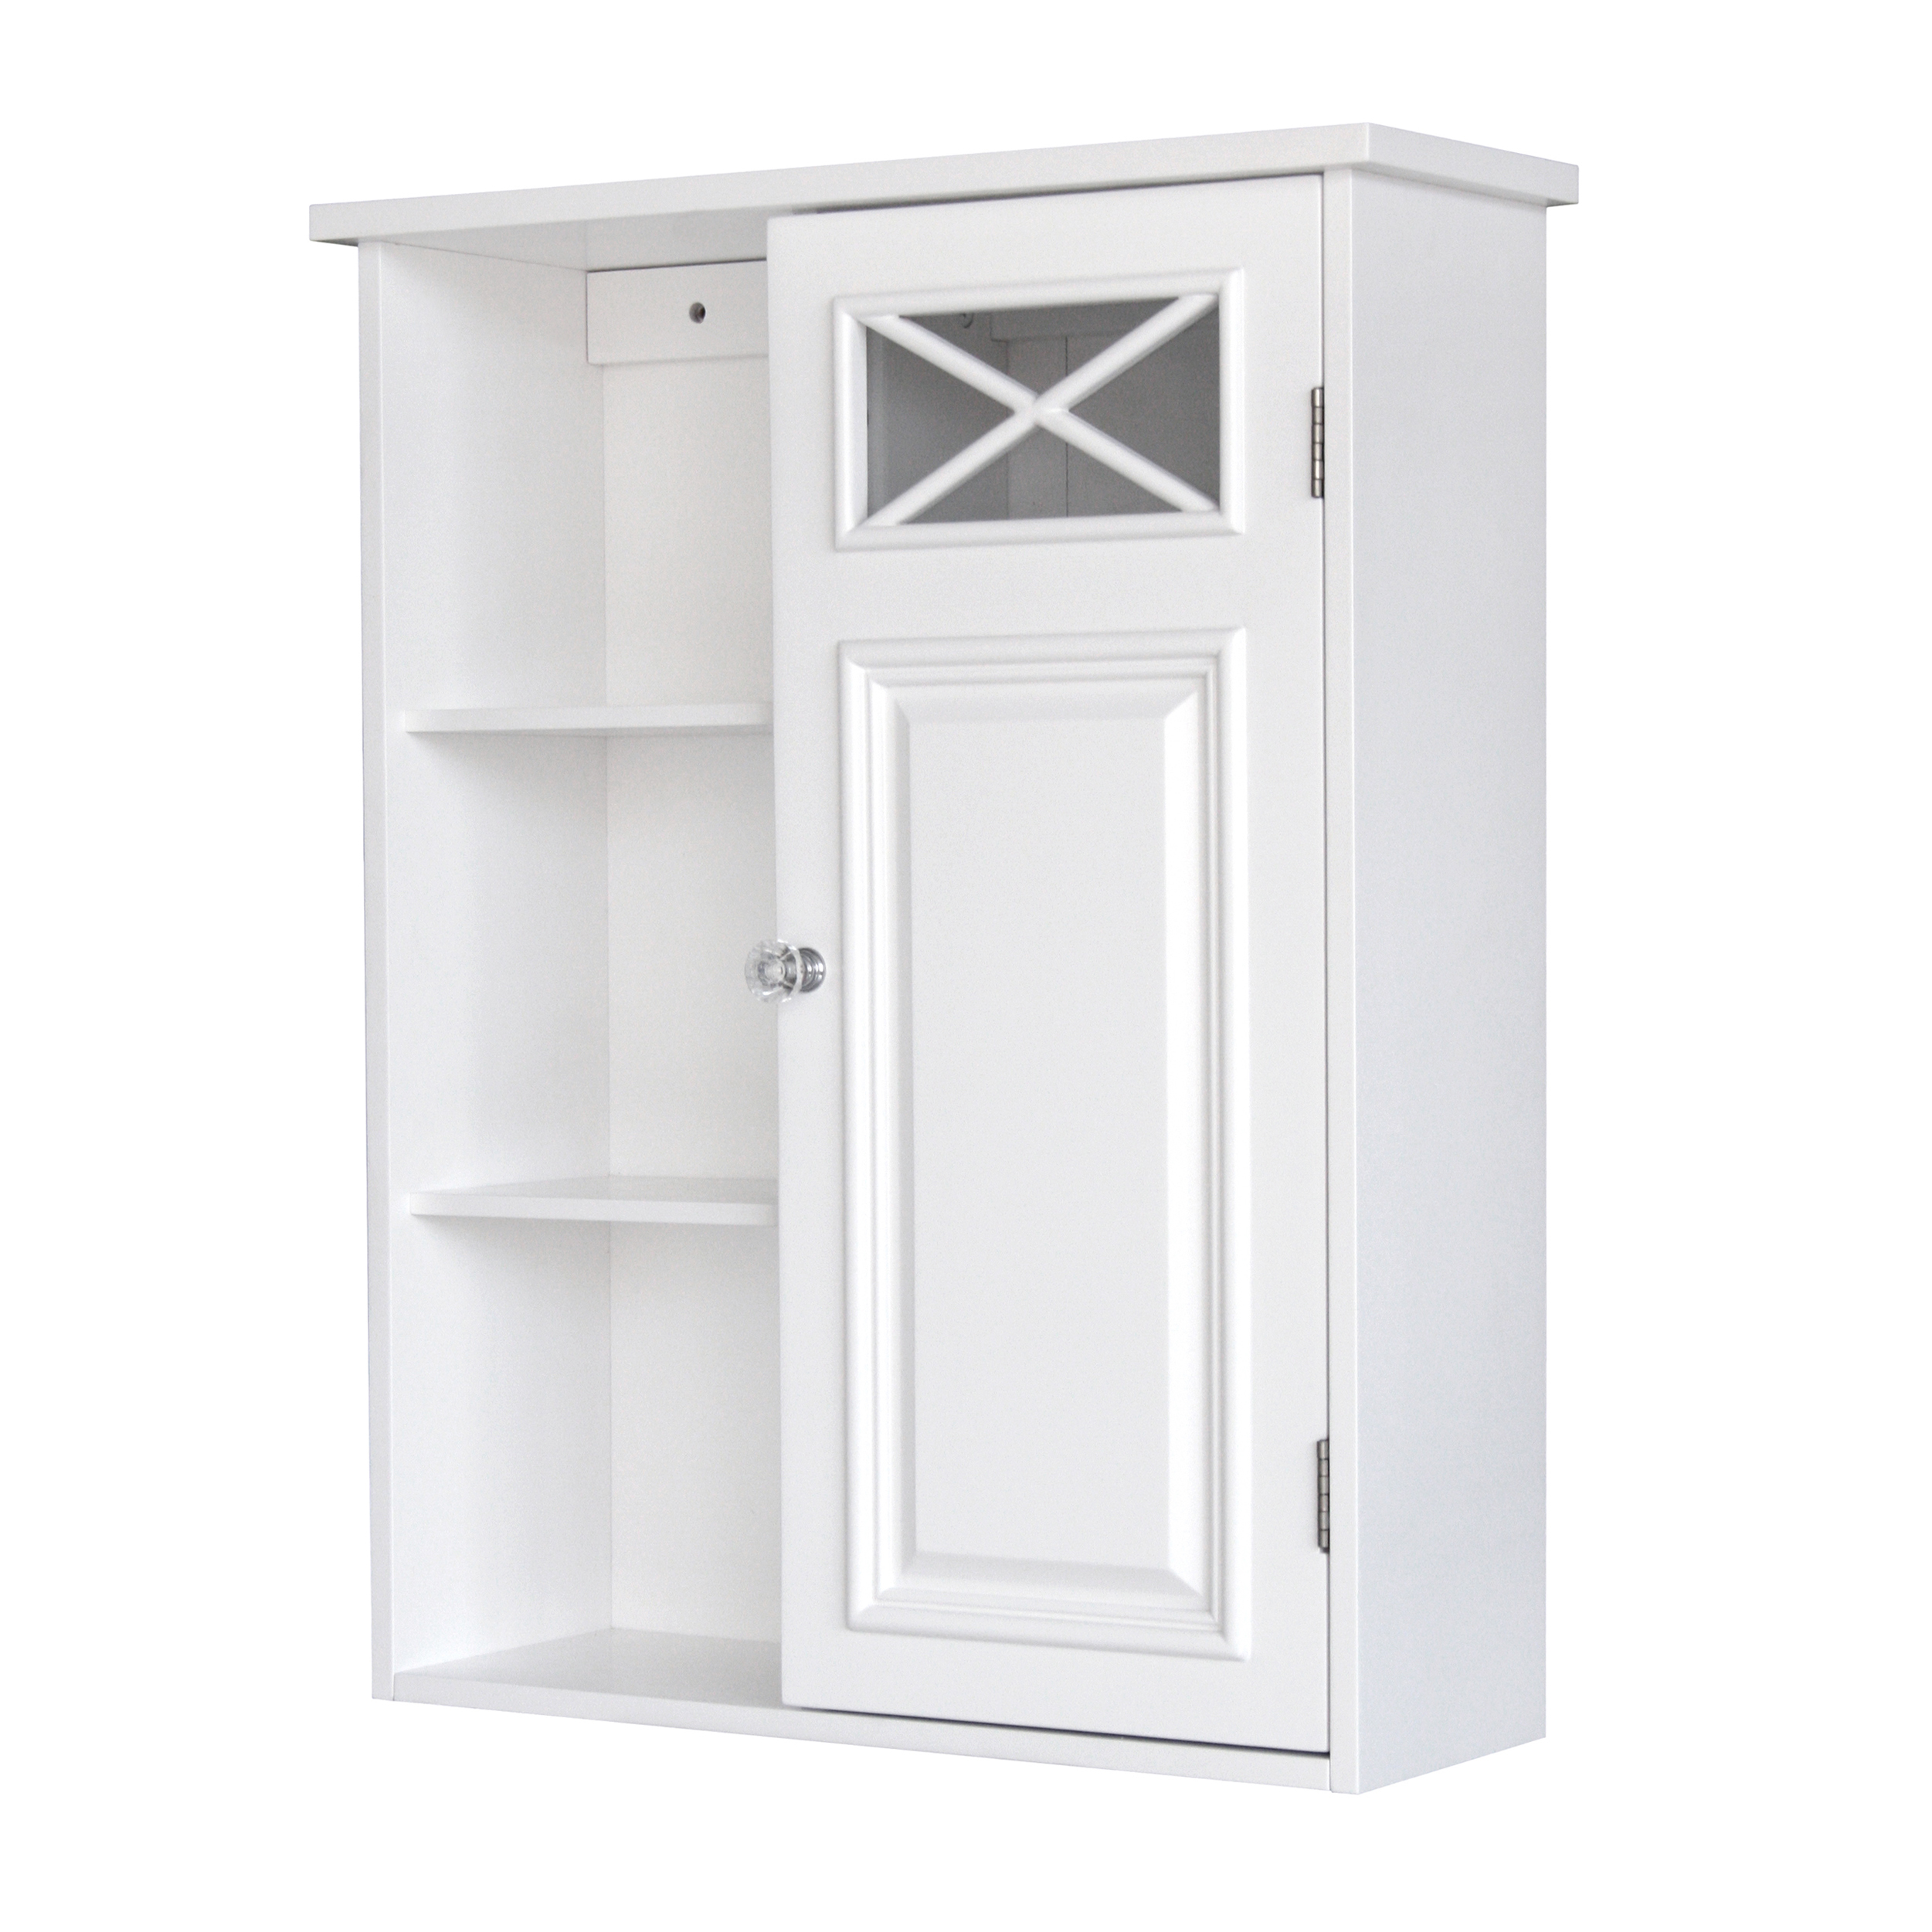 Teamson Home Dawson Removable Wooden Wall Cabinet with Cross Molding, White - image 1 of 7